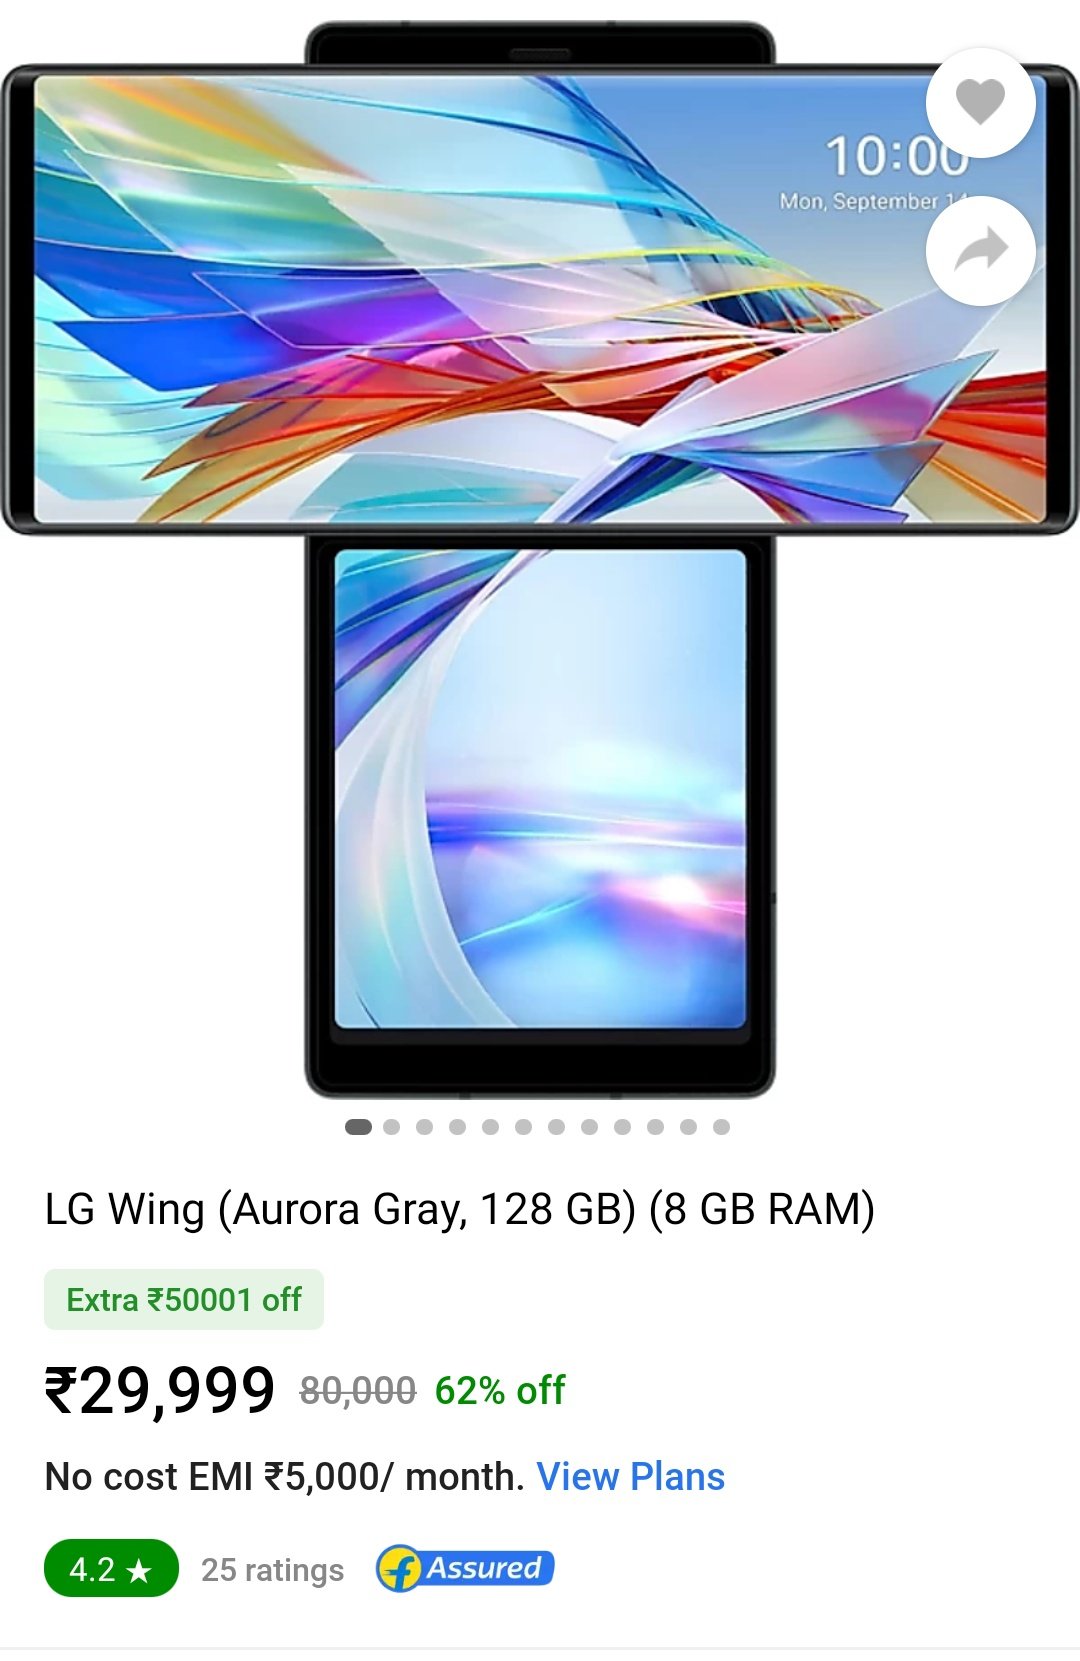 Massive Discount On LG Wing By LG - LG Wing Can Be Purchased For Just Rs. 29,999 via Flipkart